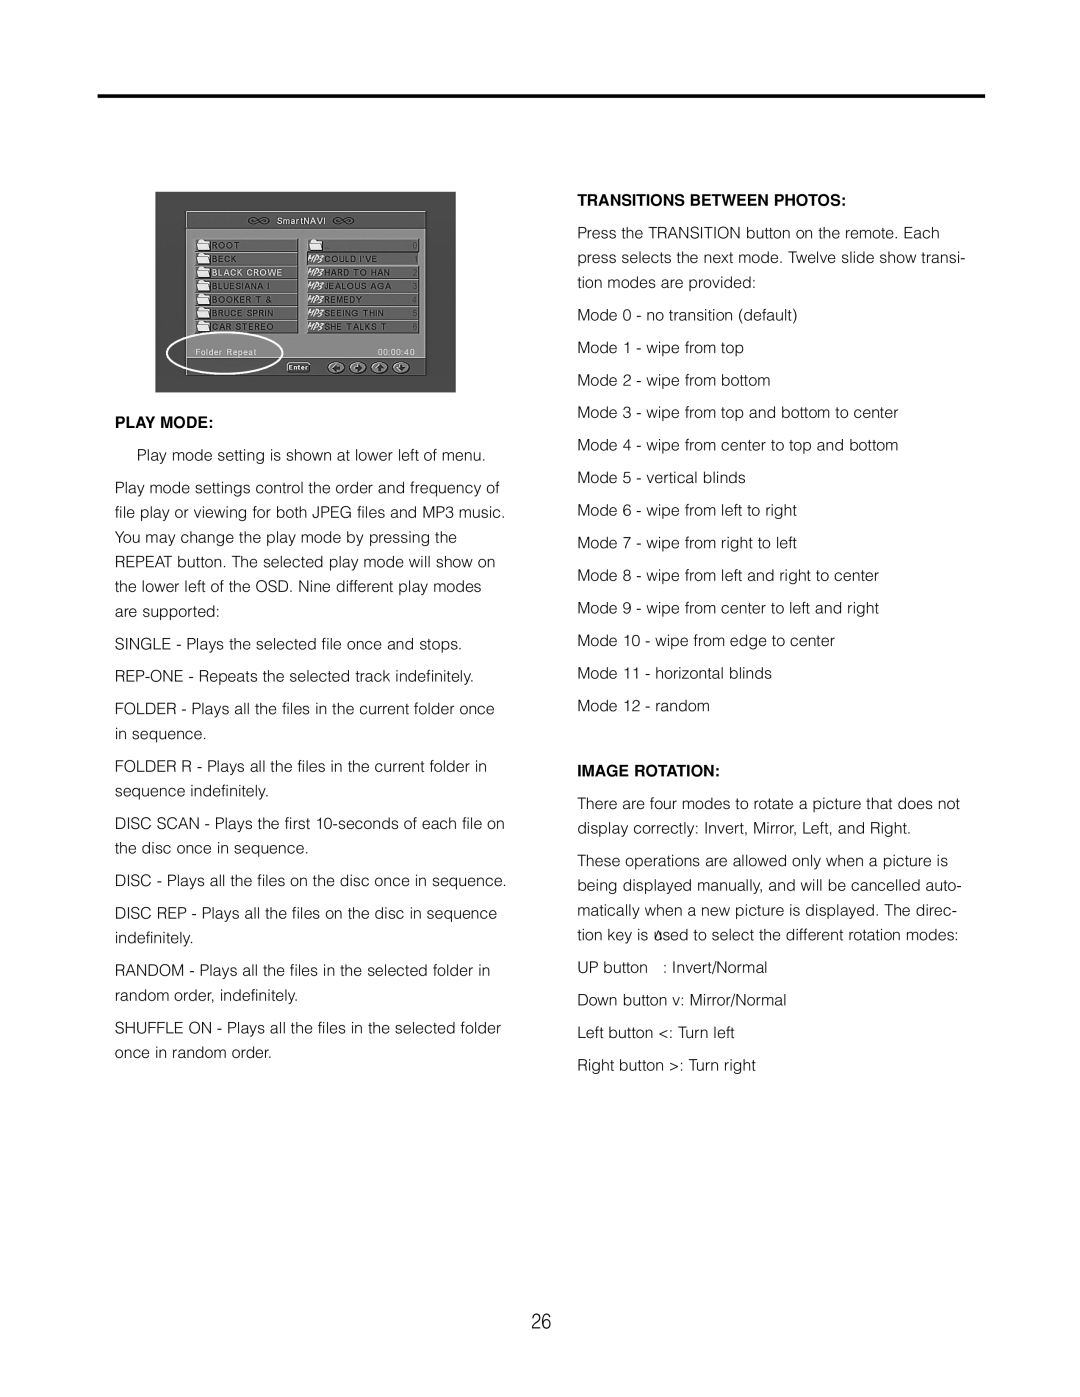 Cambridge SoundWorks AVS550 user manual Play Mode, Transitions Between Photos, Image Rotation 